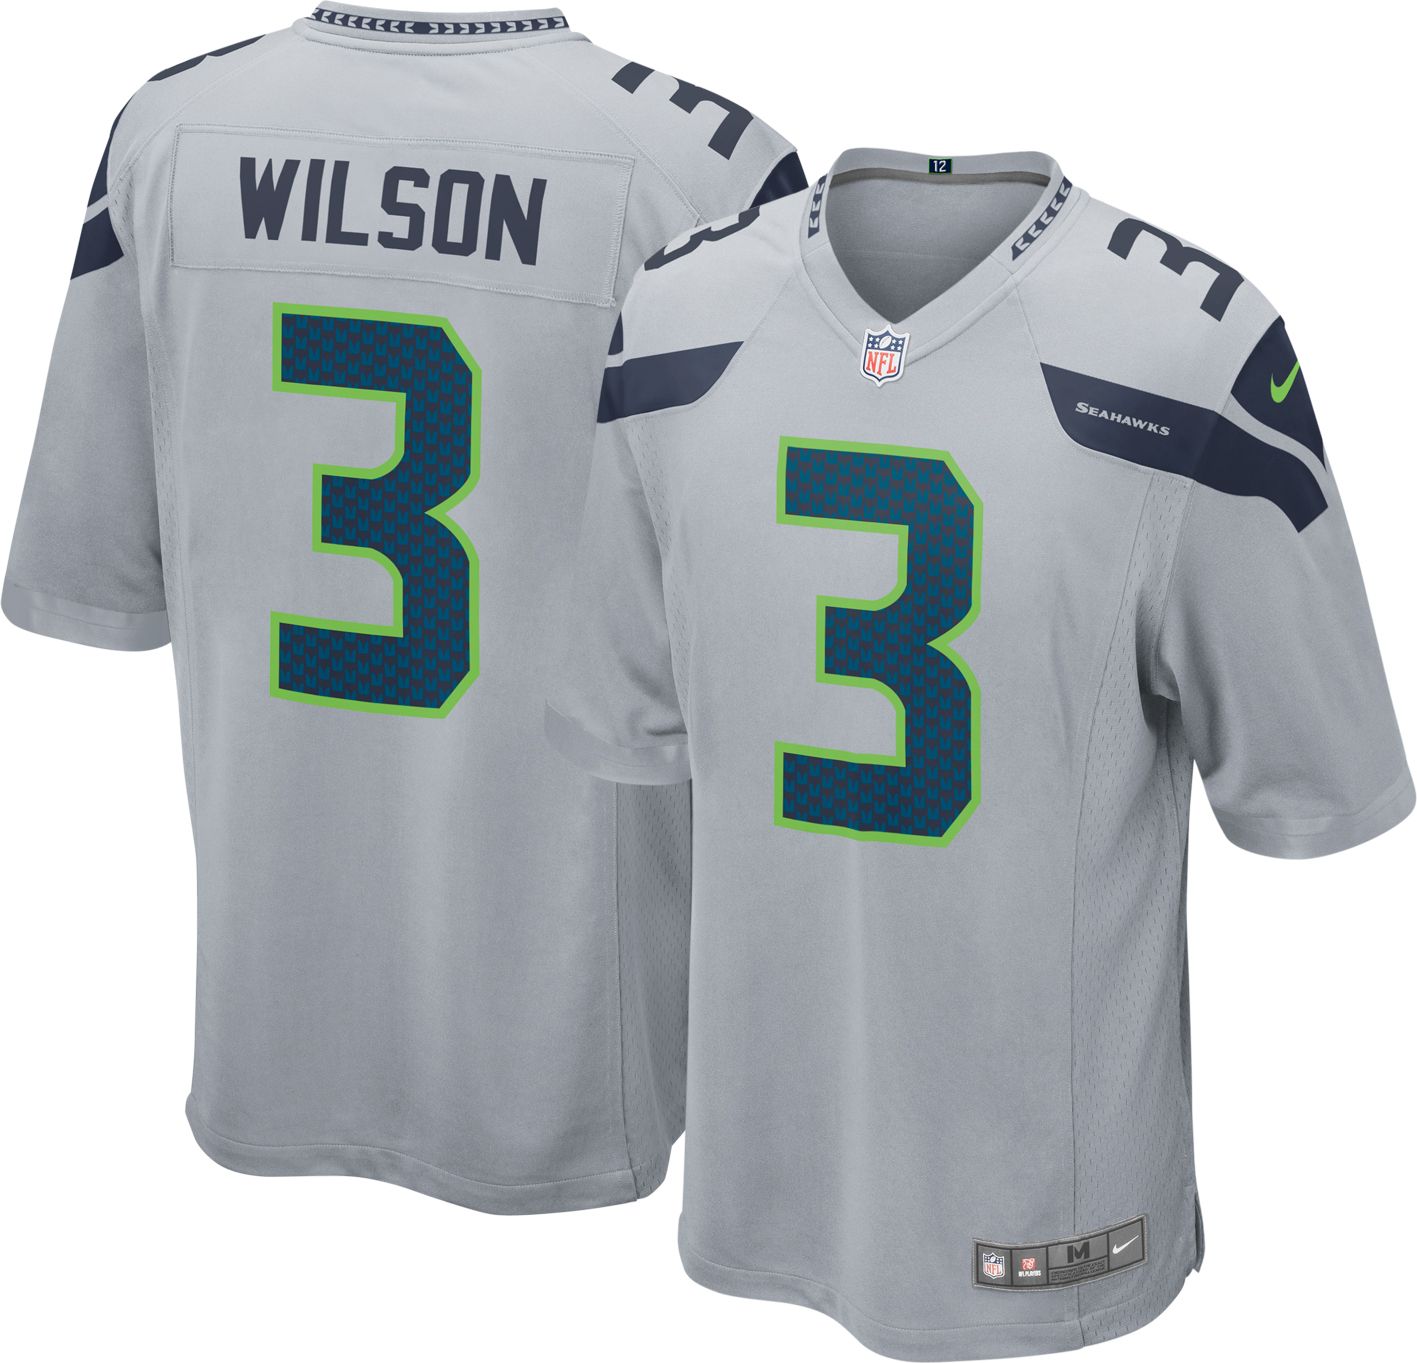 russell wilson youth small jersey